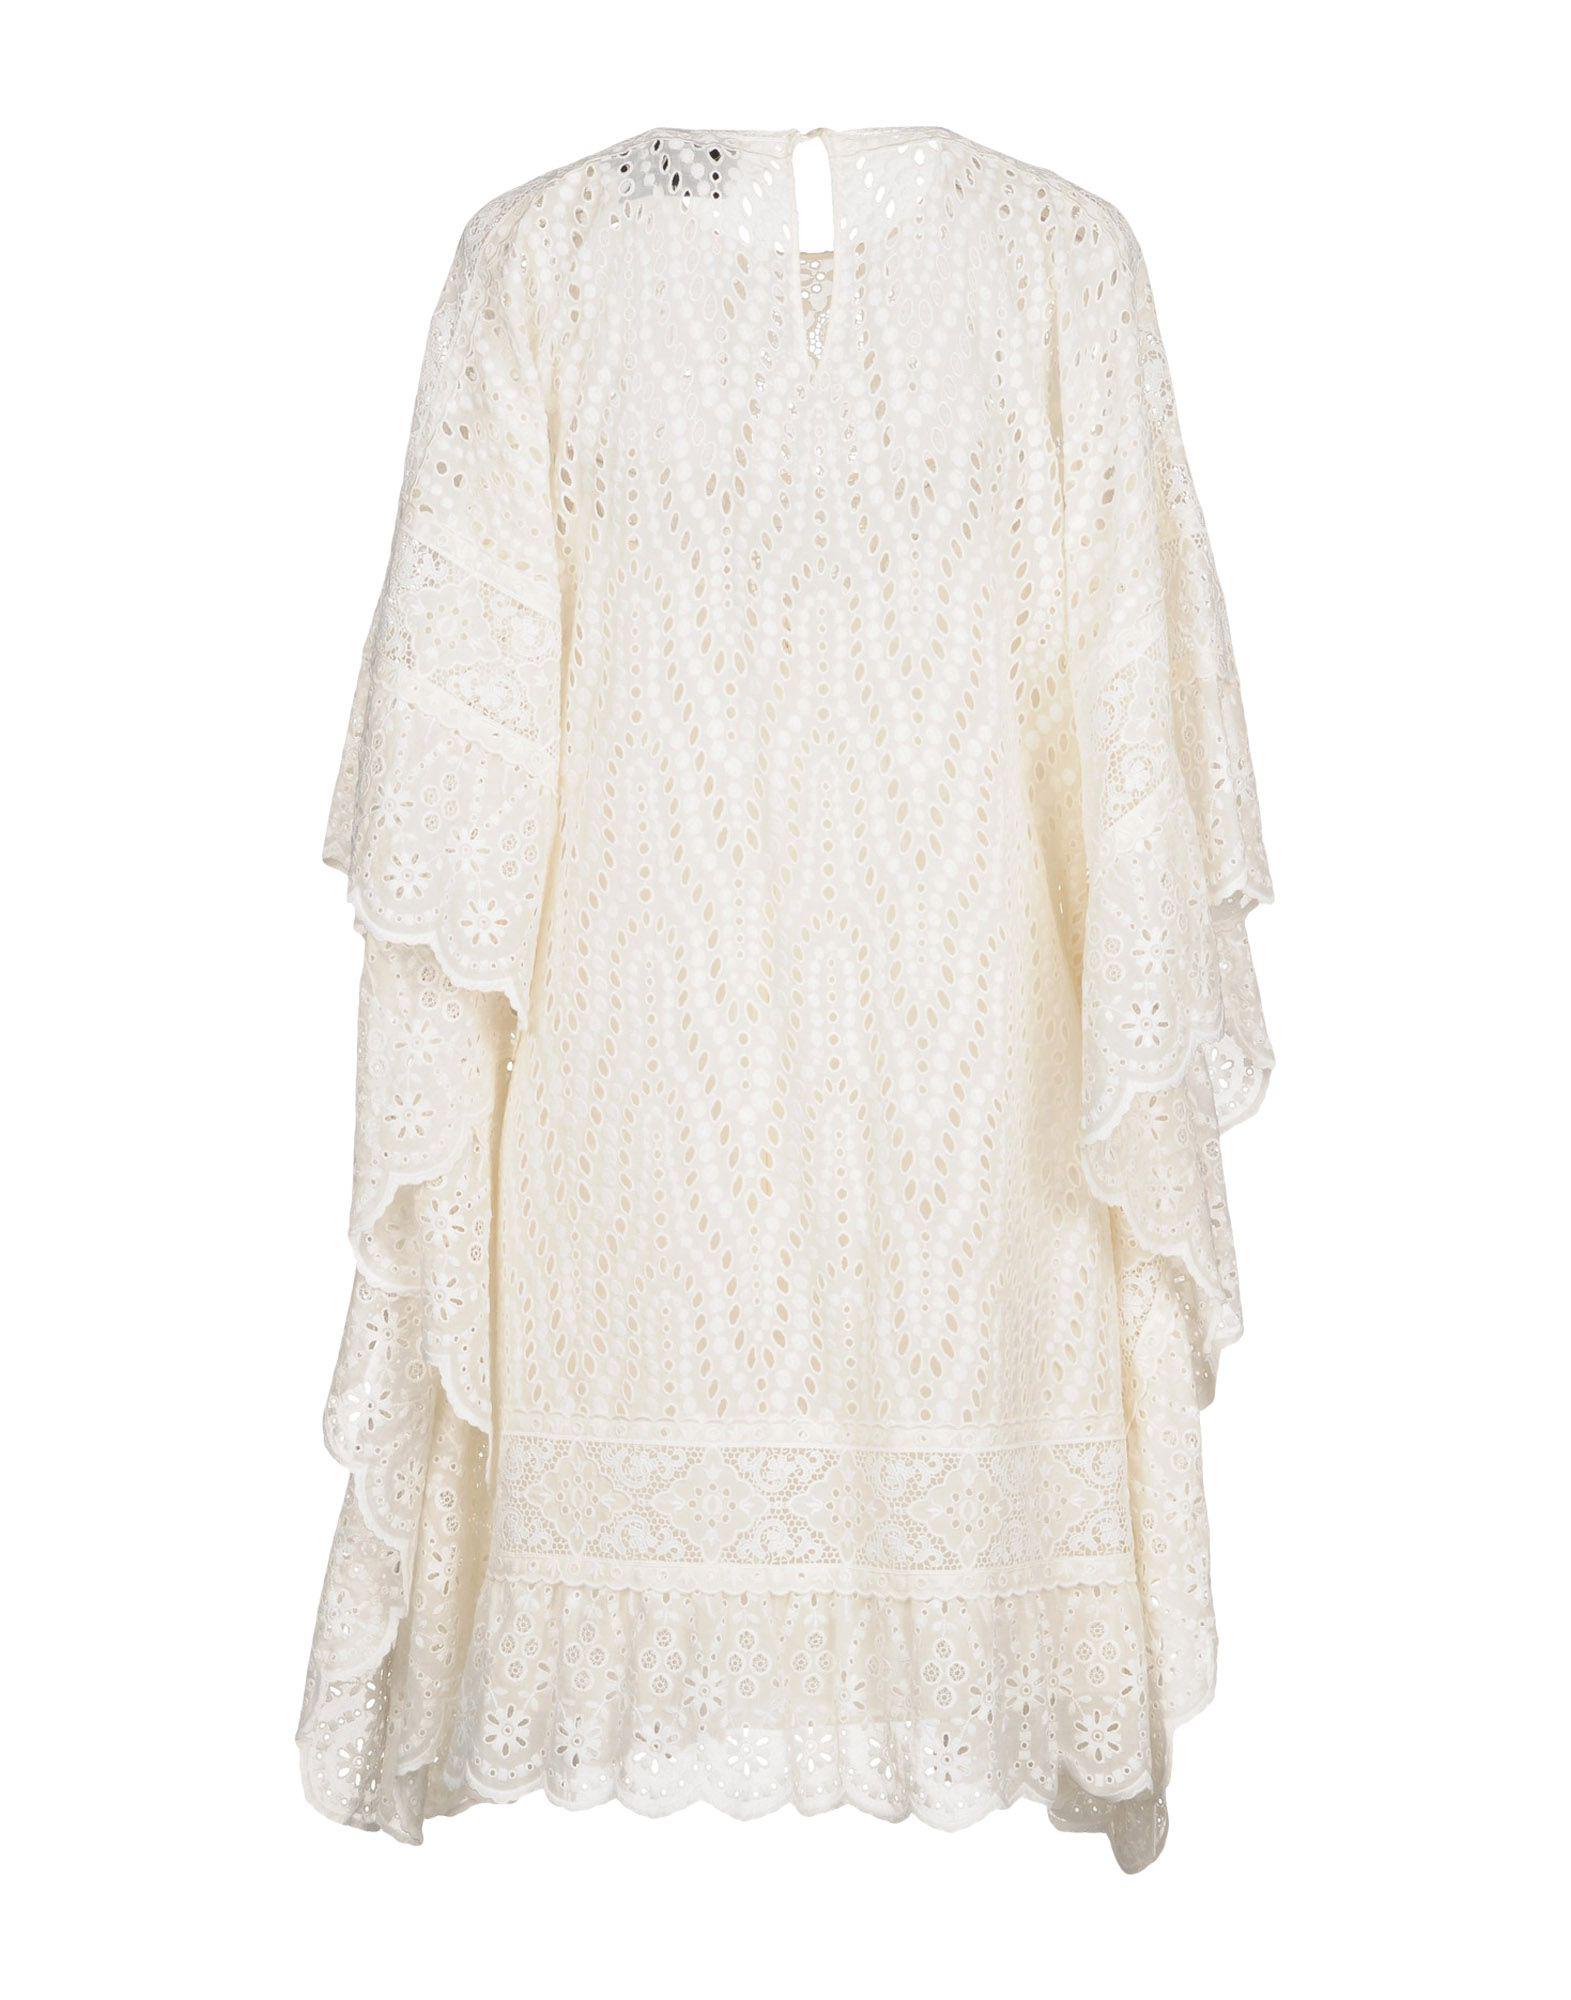 Valentino Lace Short Dress in White - Lyst